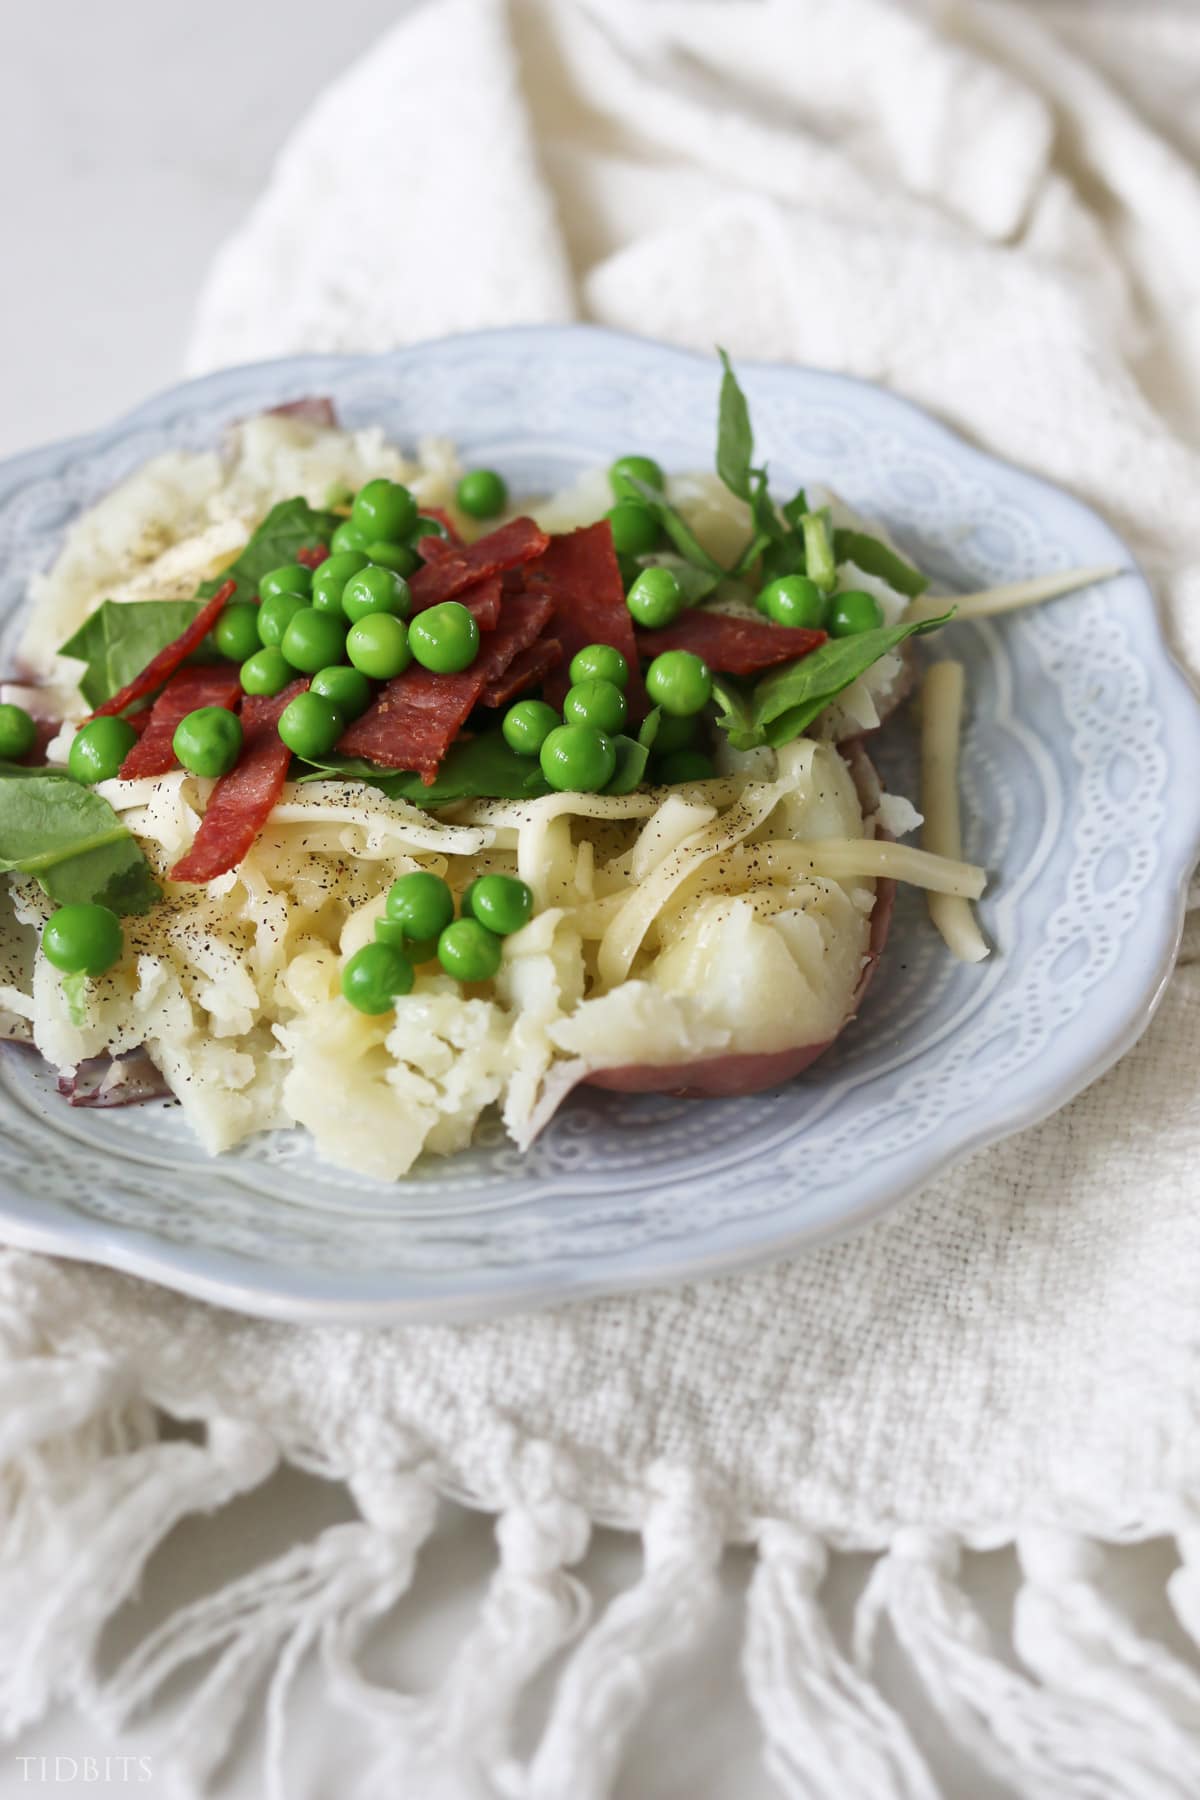 Quick and easy baked potato dinner topped with bacon, greens and peas